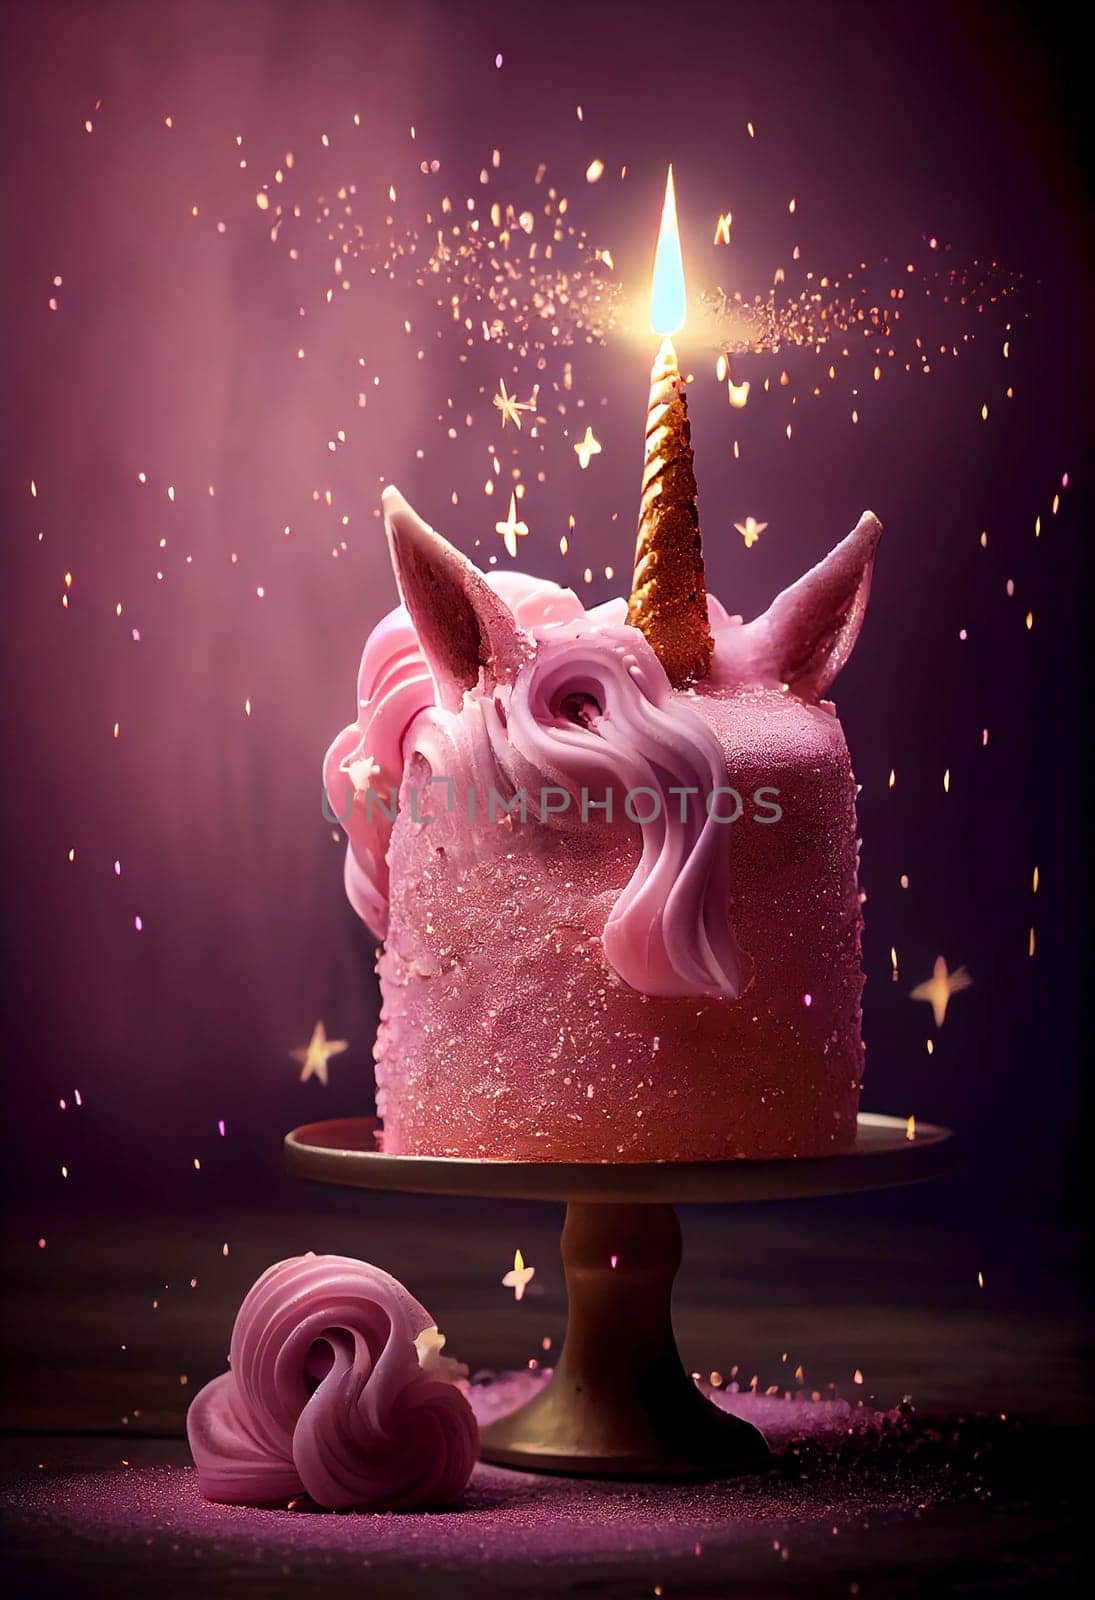 Unicorn cake design with pink frosting with burning candle and sparkling bokeh lights, birthday, little girls concept by Annebel146